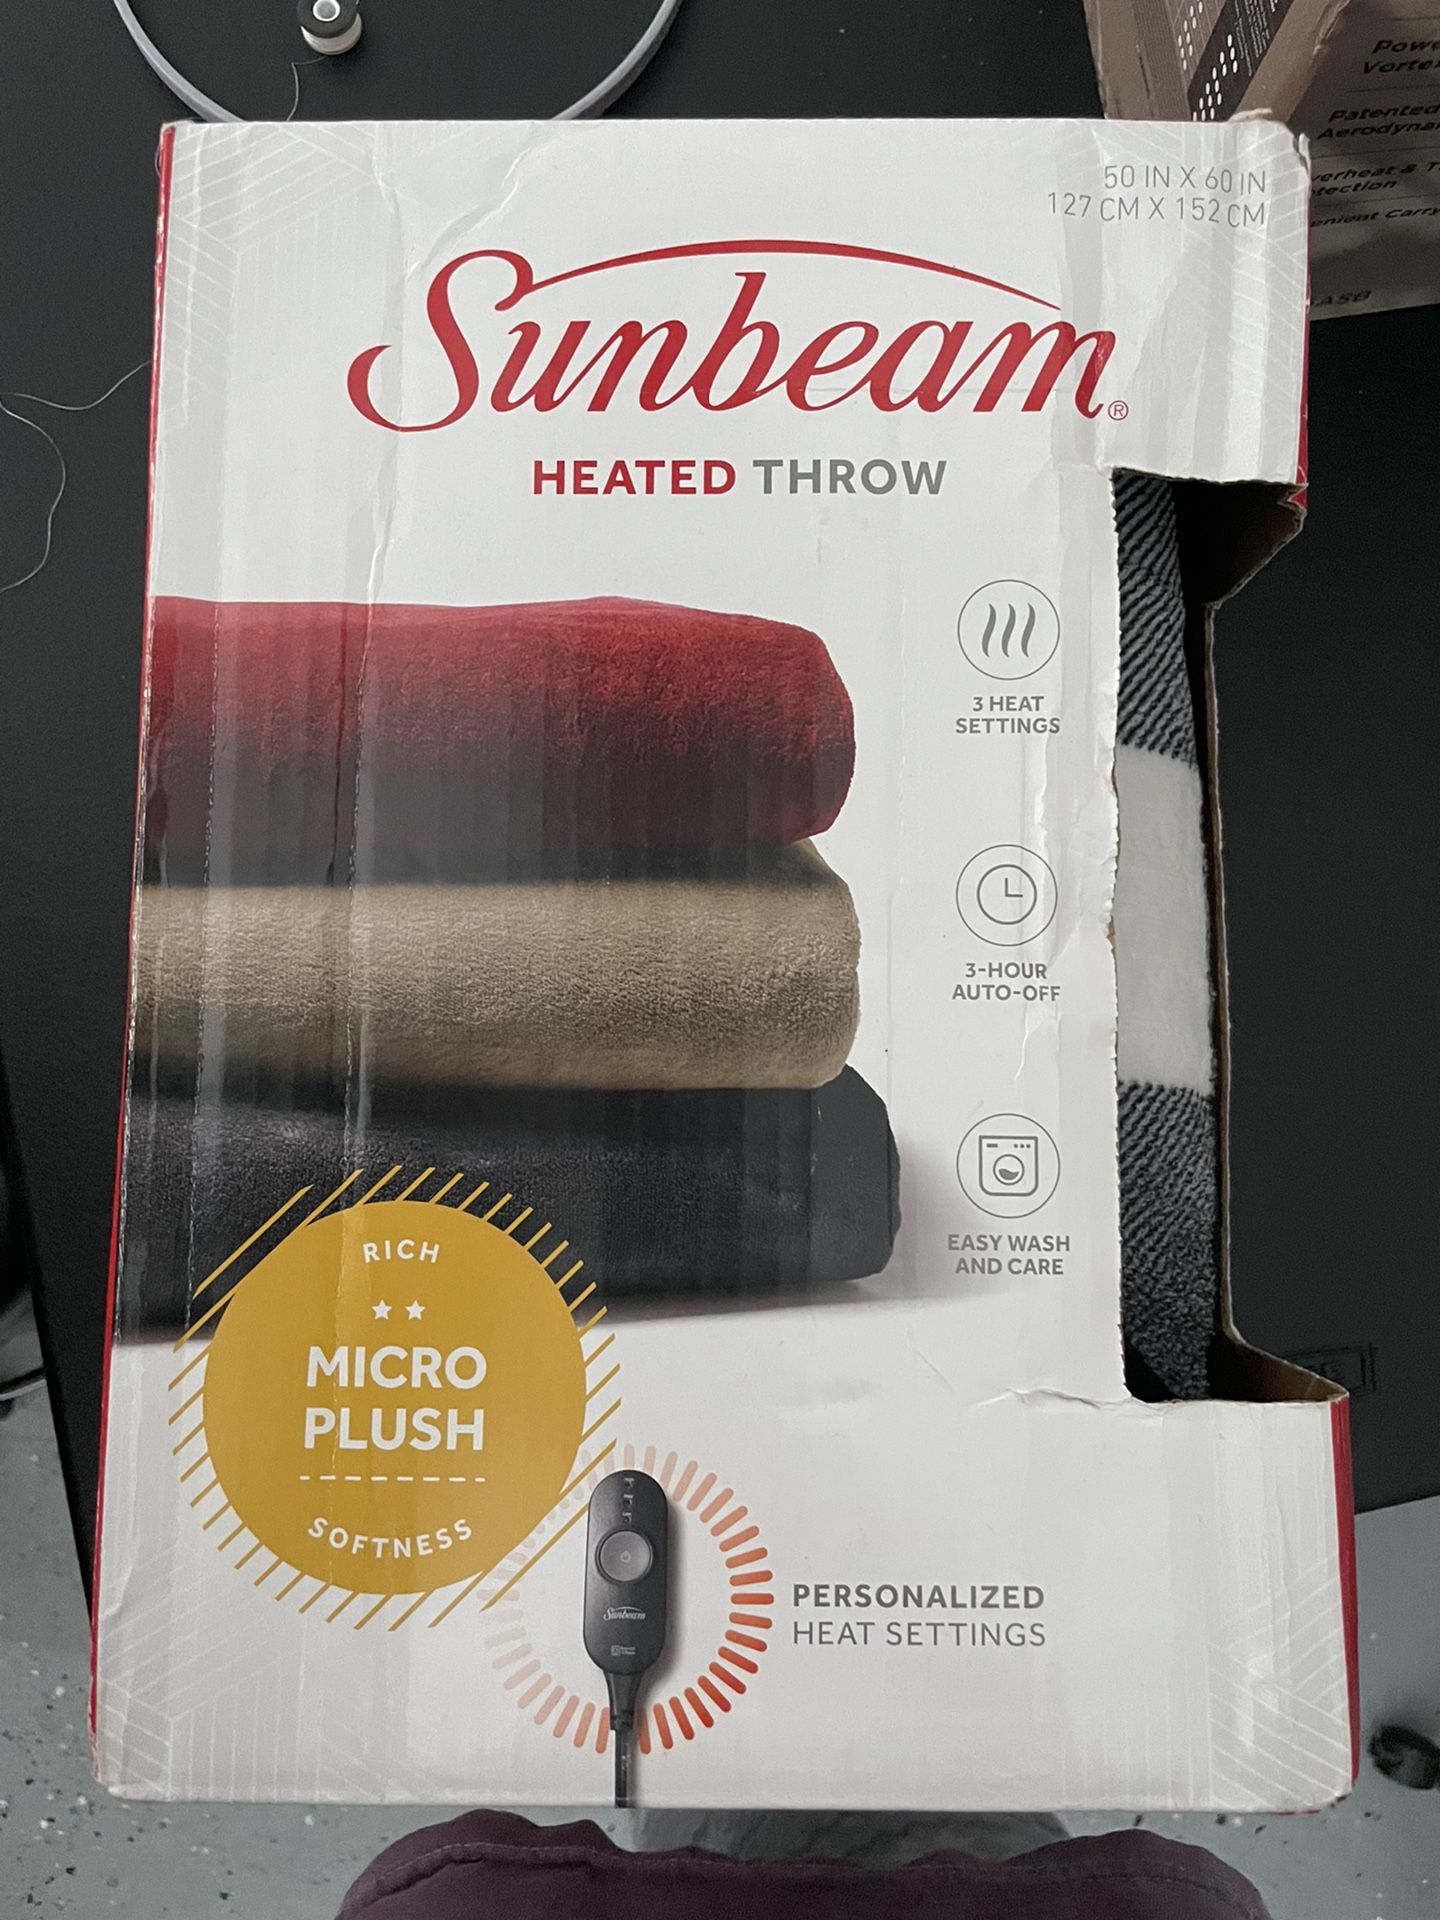 Sunbeam Electric Throw Blanket, Microplush and Sherpa, Size: 50 inch x 60 inch, Black And White Checkered 